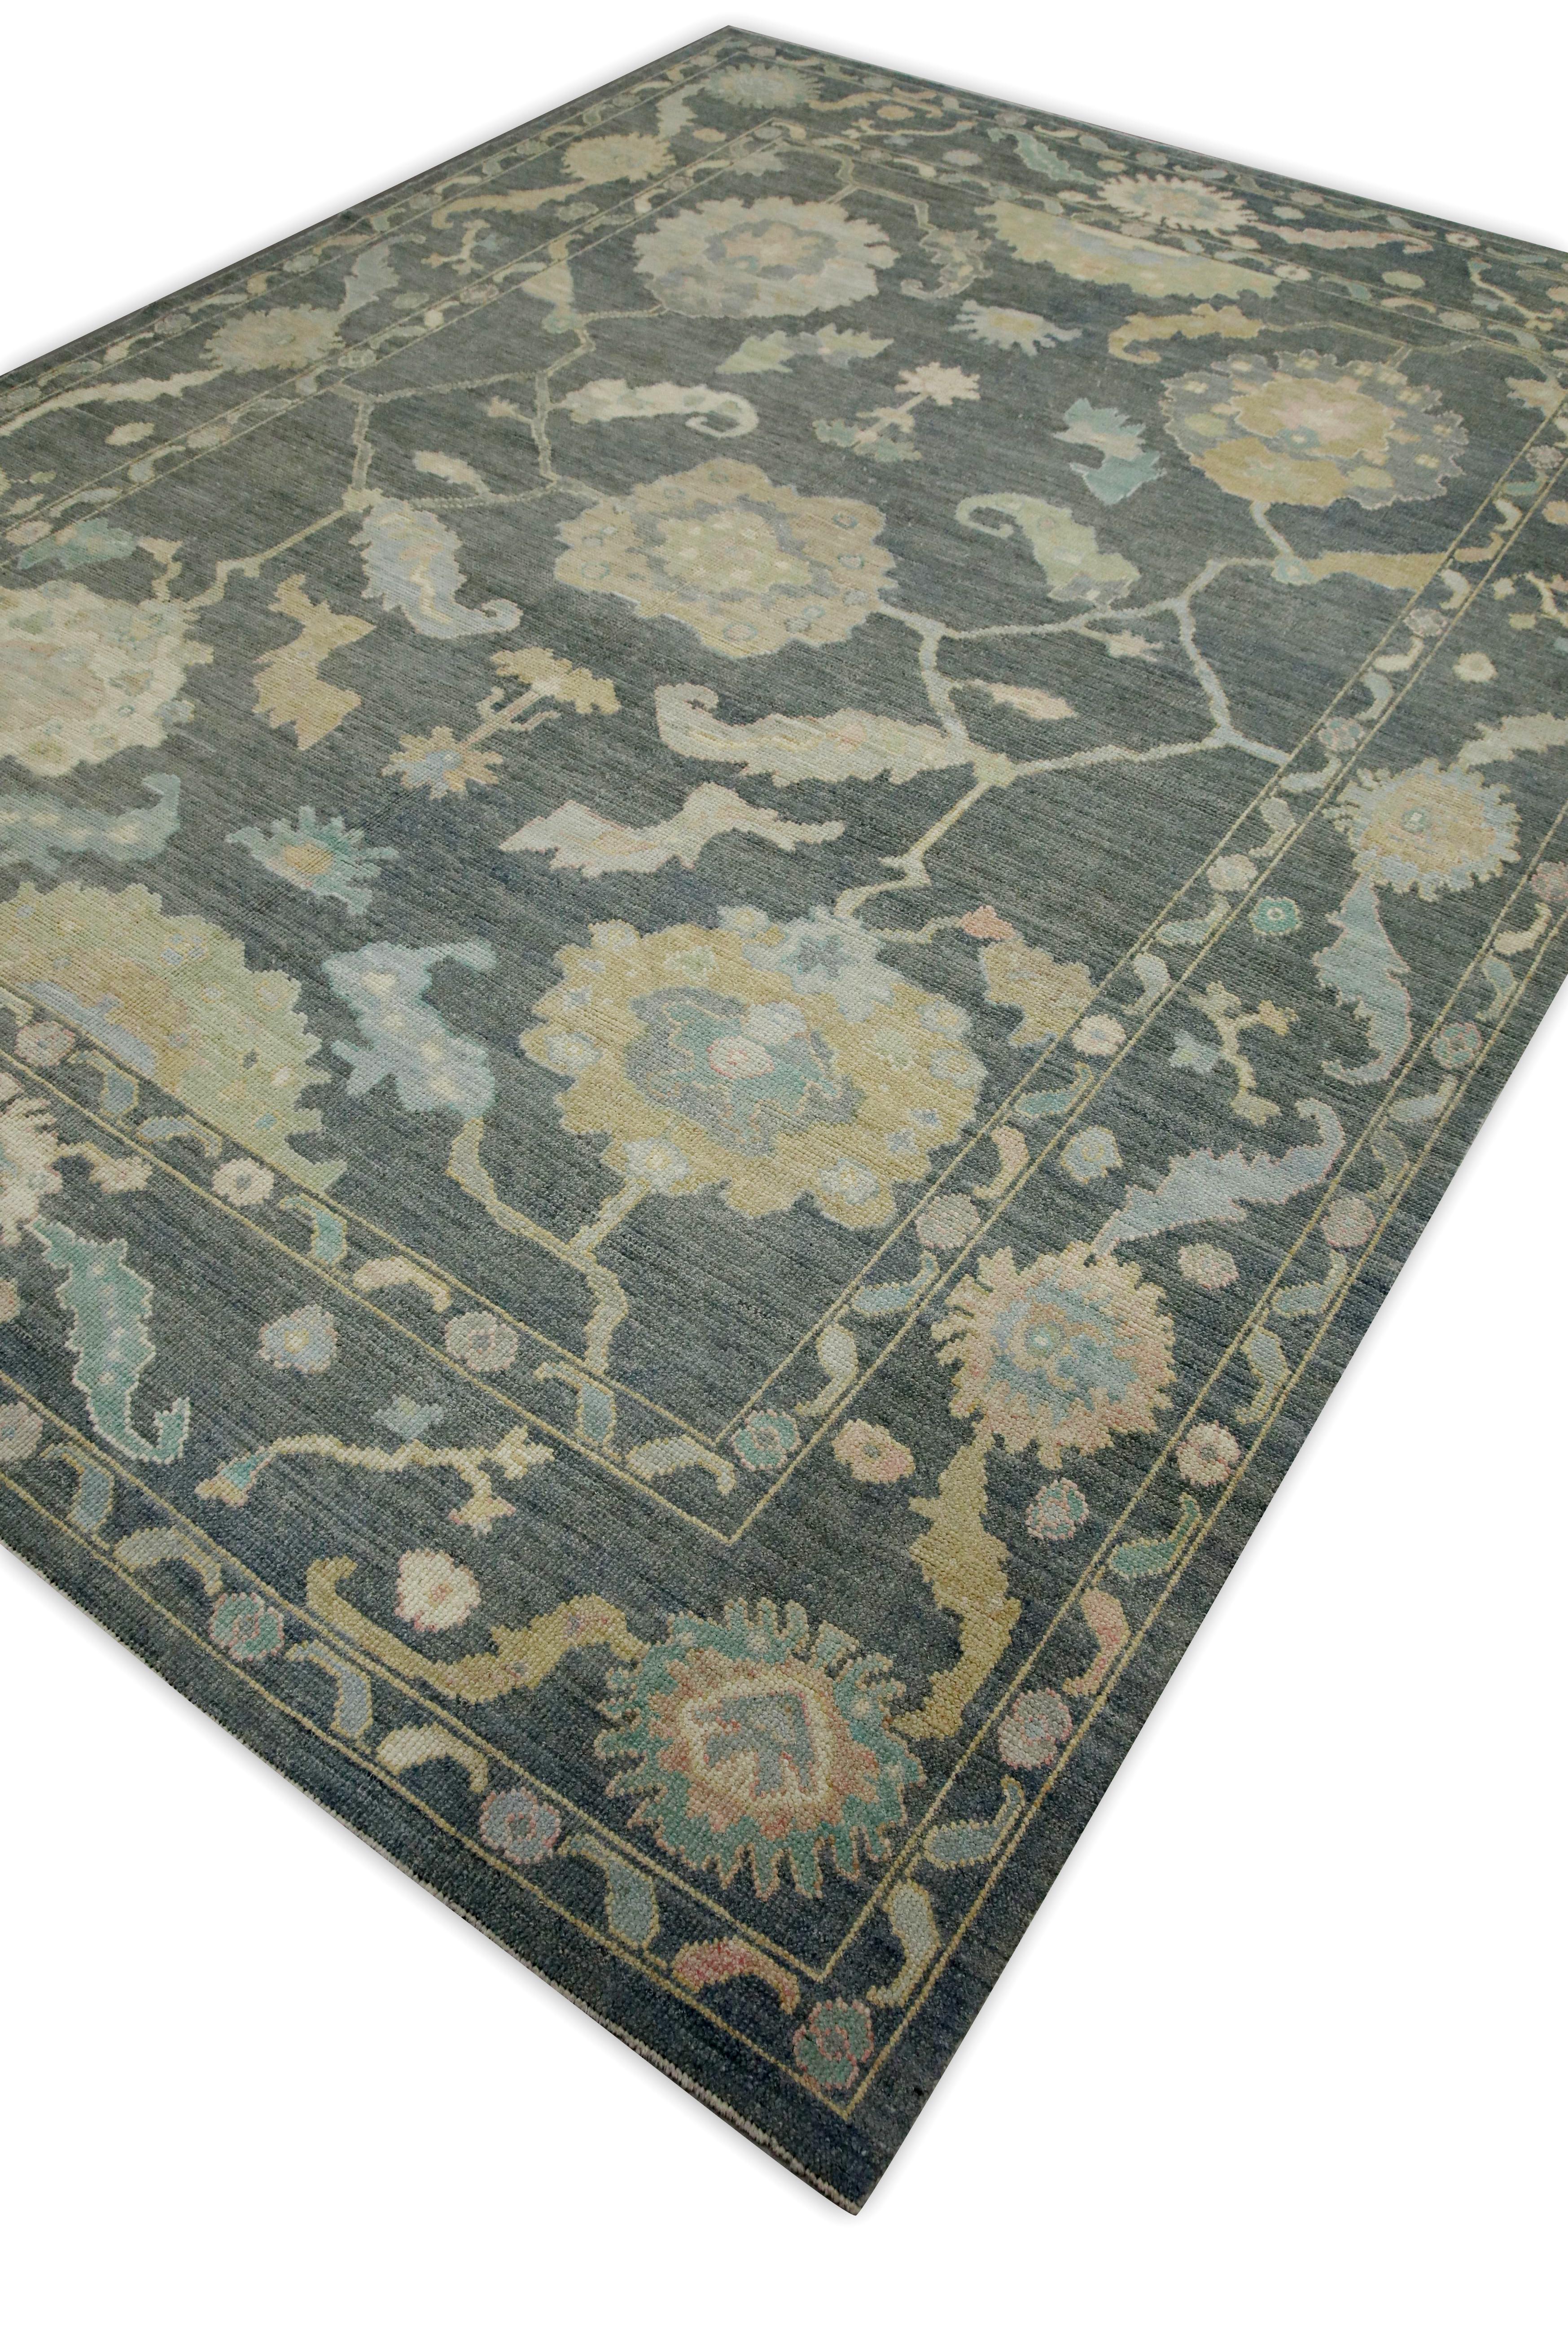 Contemporary Gray Floral Design Handwoven Wool Turkish Oushak Rug 8' x 10'6